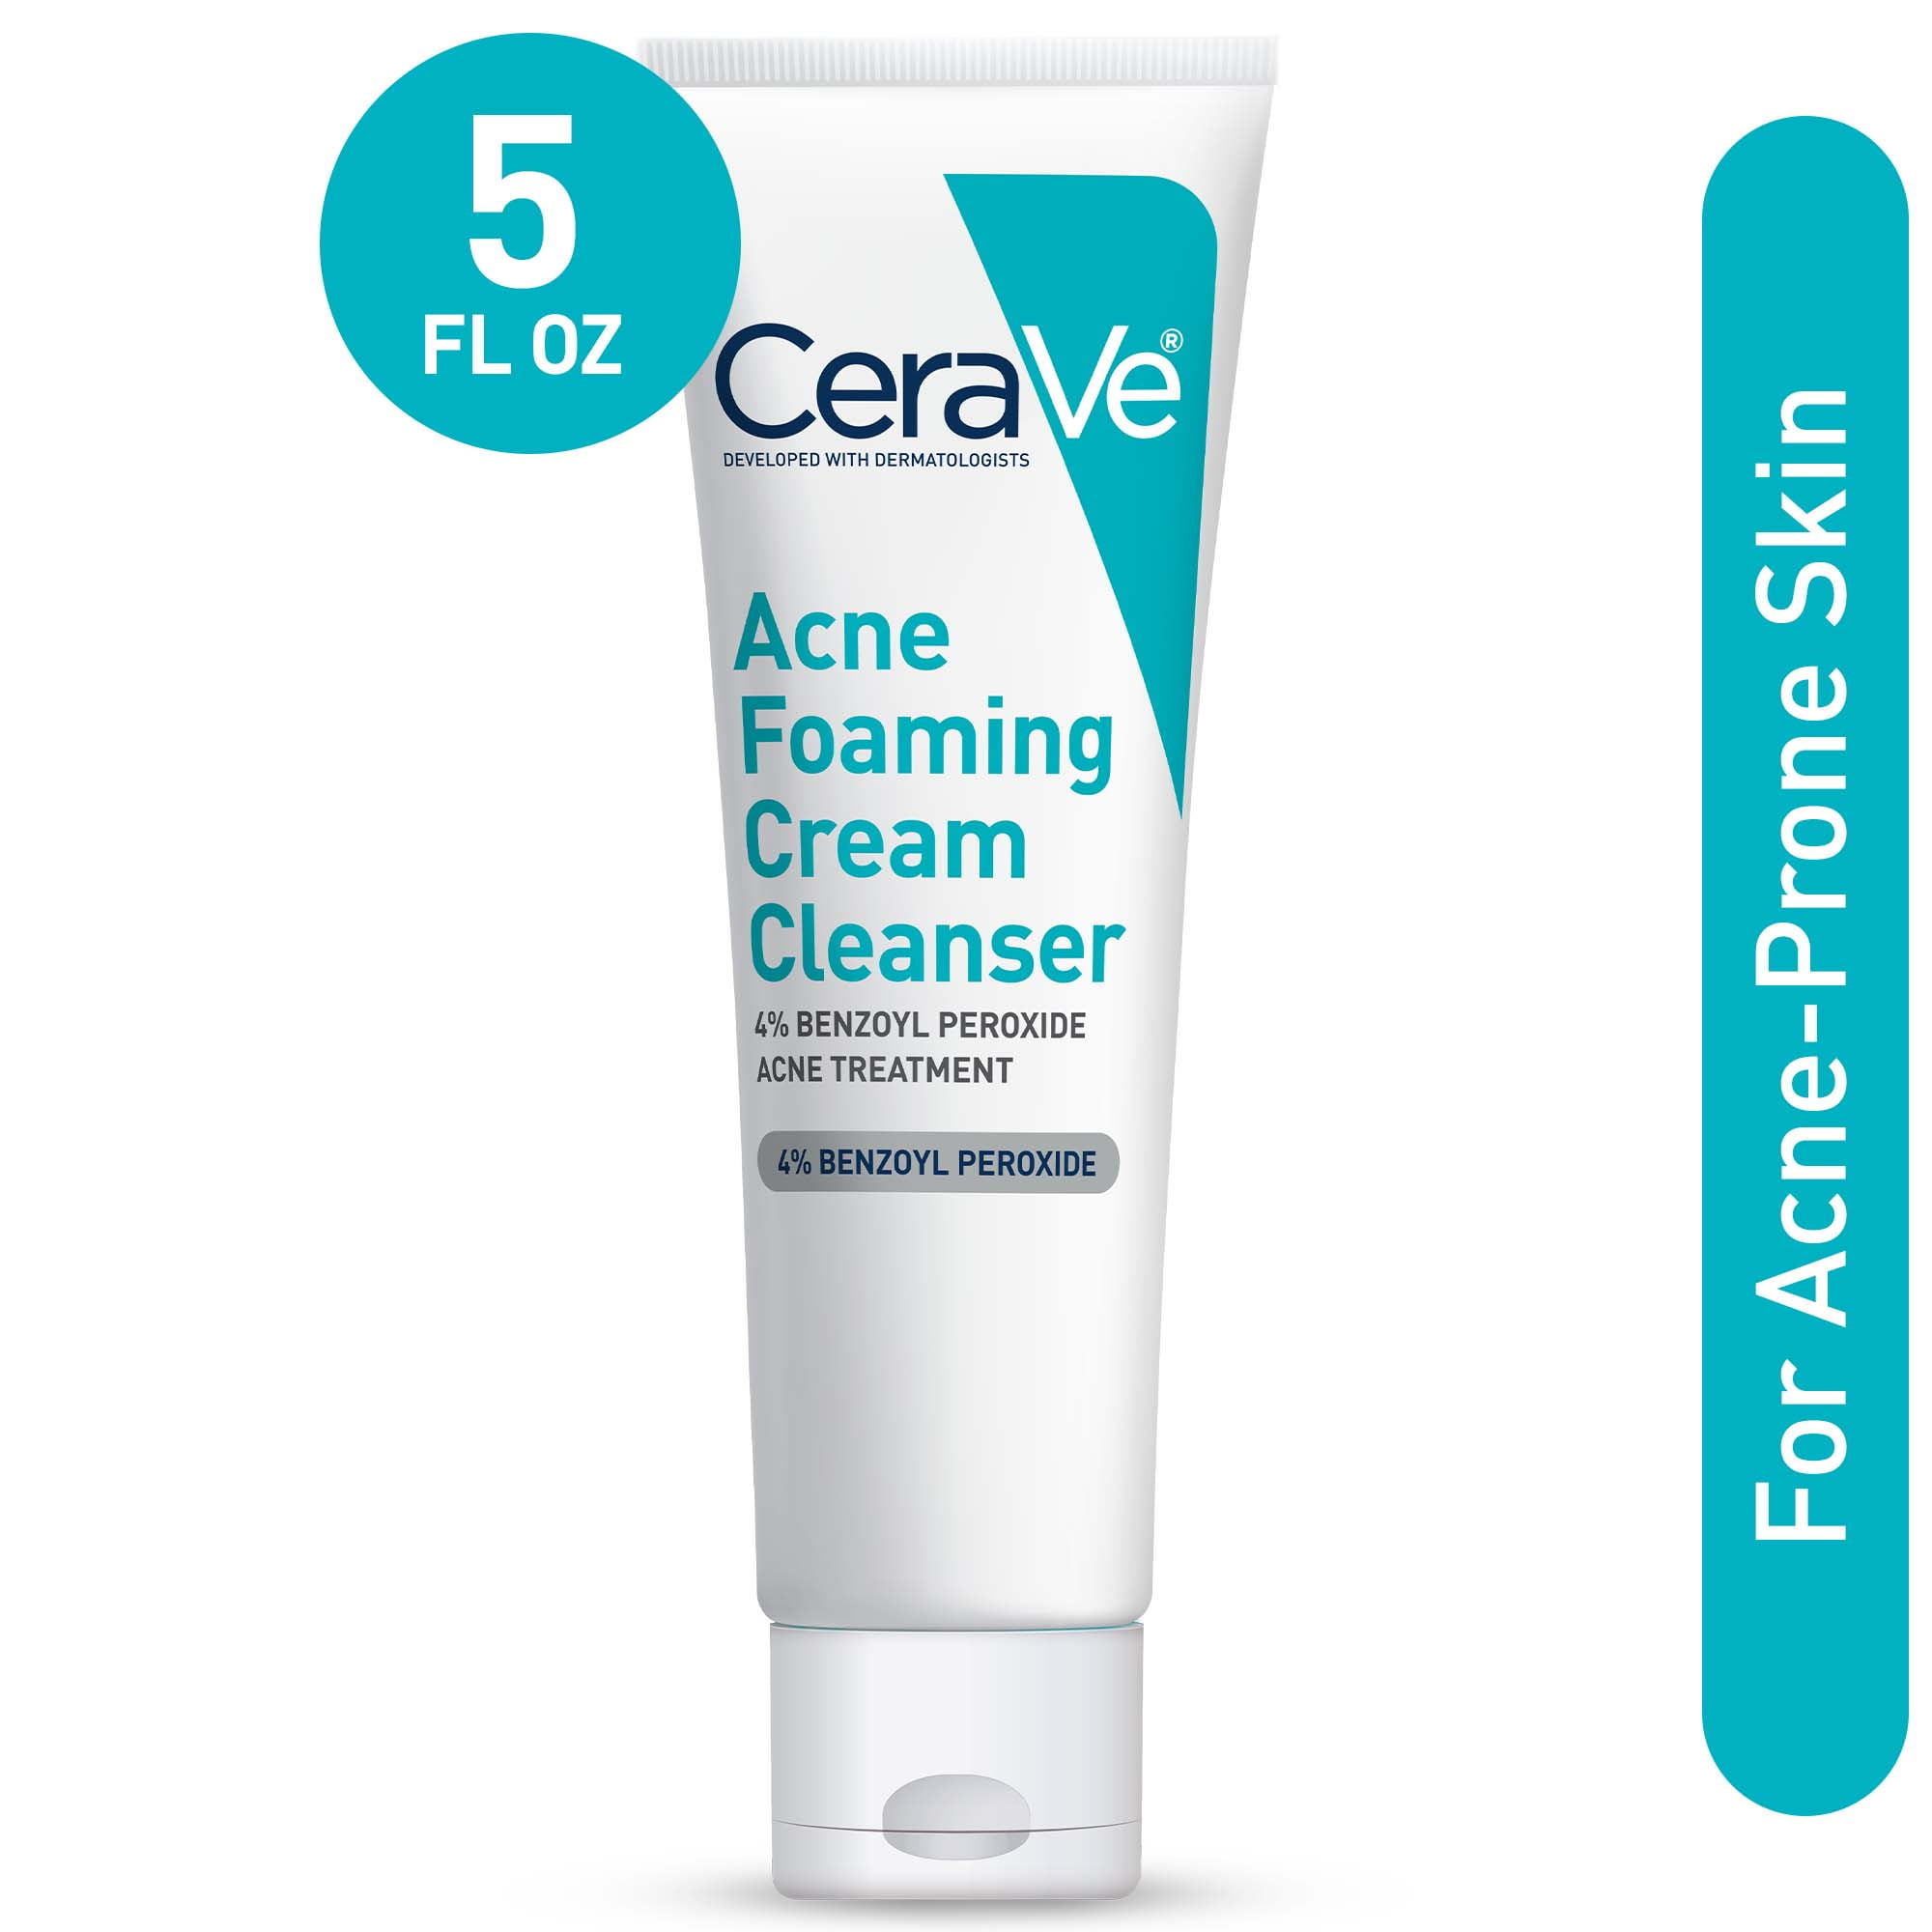 CeraVe Acne Foaming Cream Face Cleanser, Acne Treatment Face Wash with 4% Benzoyl Peroxide, Hyaluronic Acid, and Niacinamide, Fragrance-Free, 5 fl oz